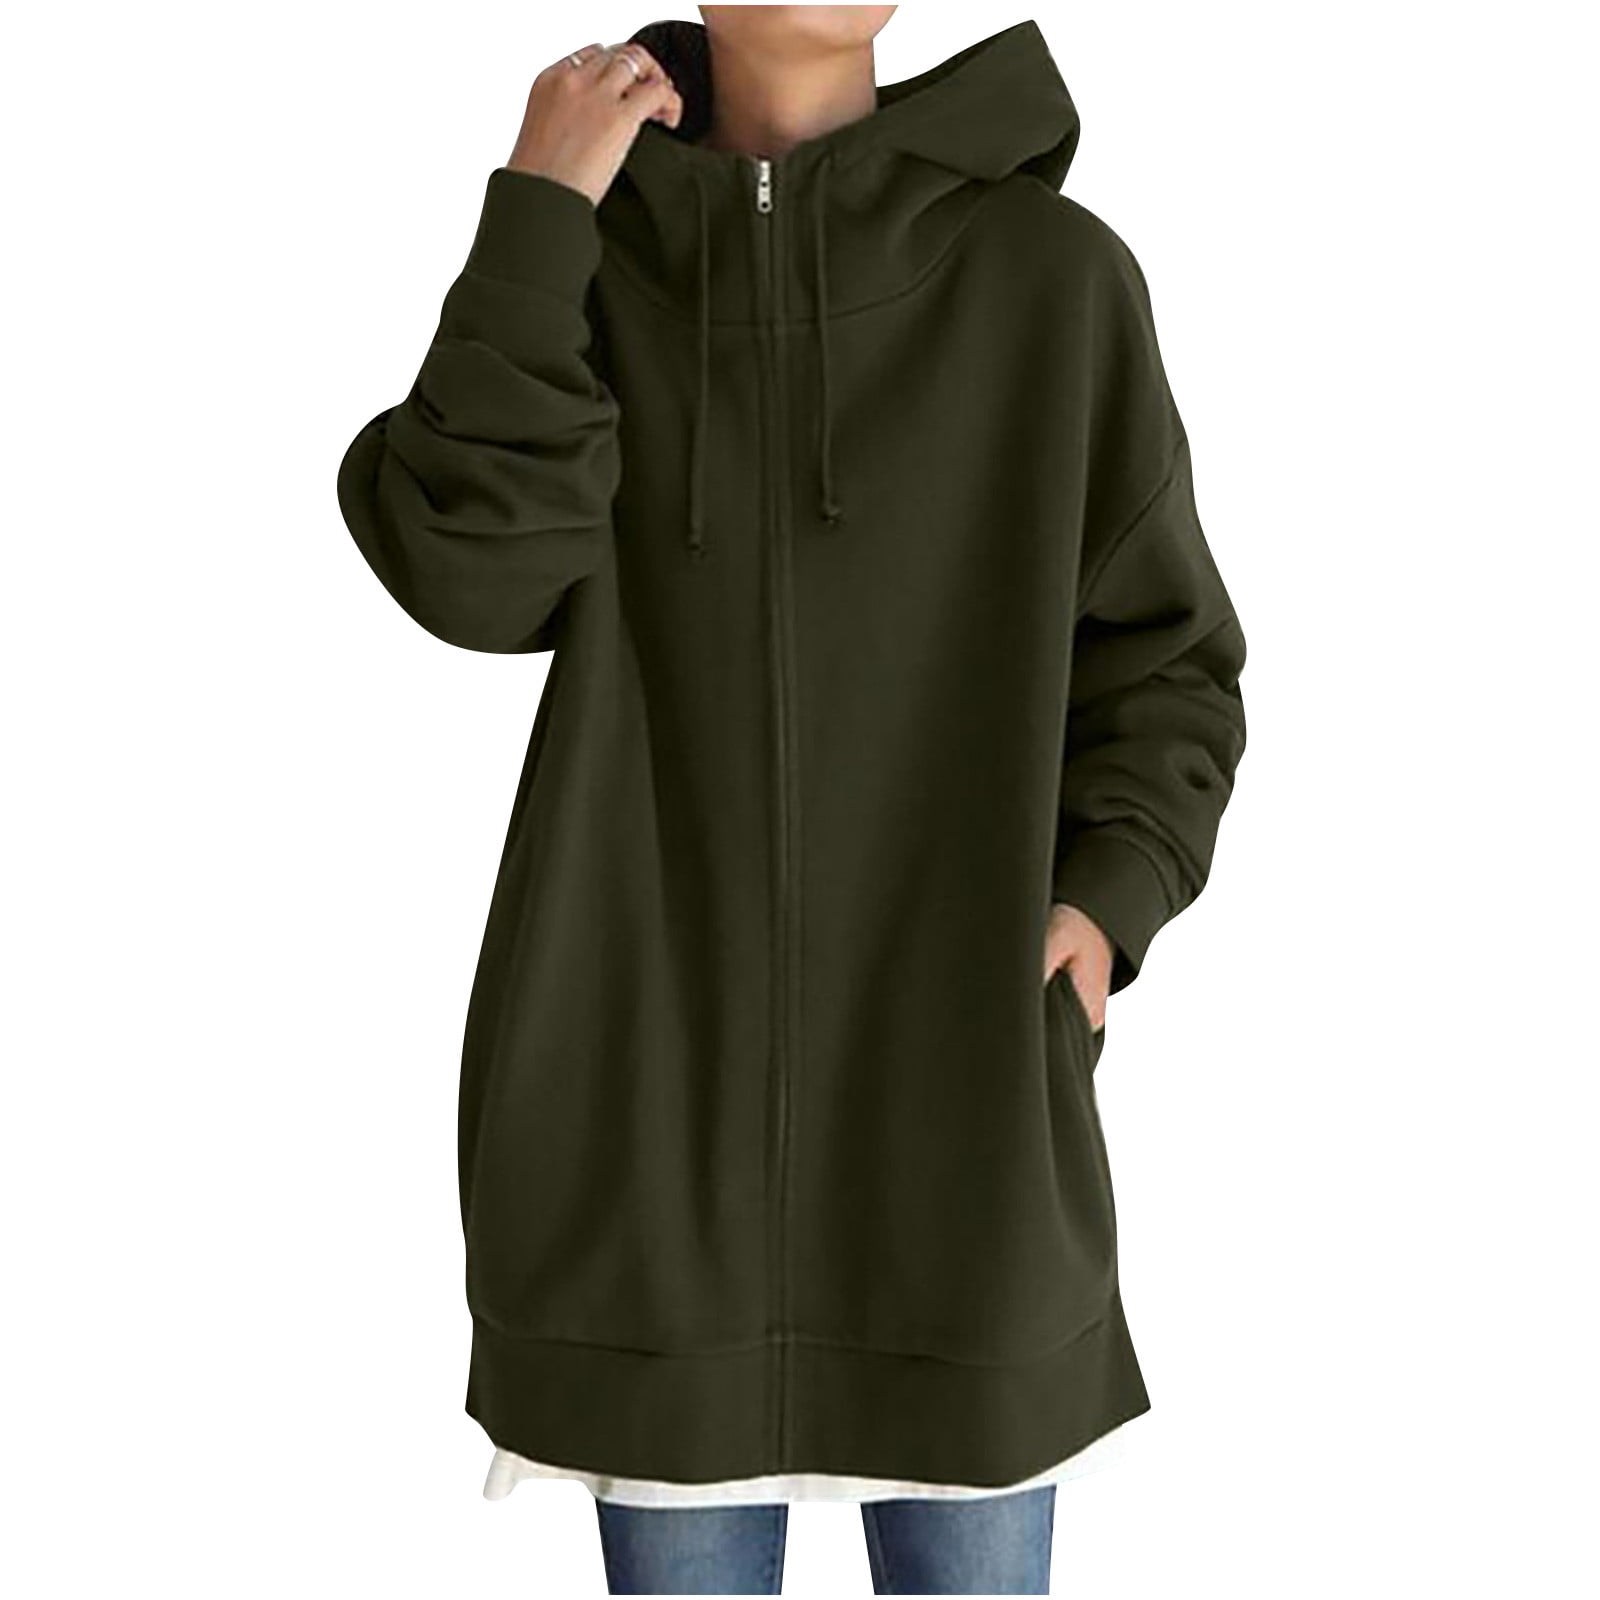 Fall Winter Clearance! ZQGJB Womens Long Hooded Trench Coat Plain Color ...